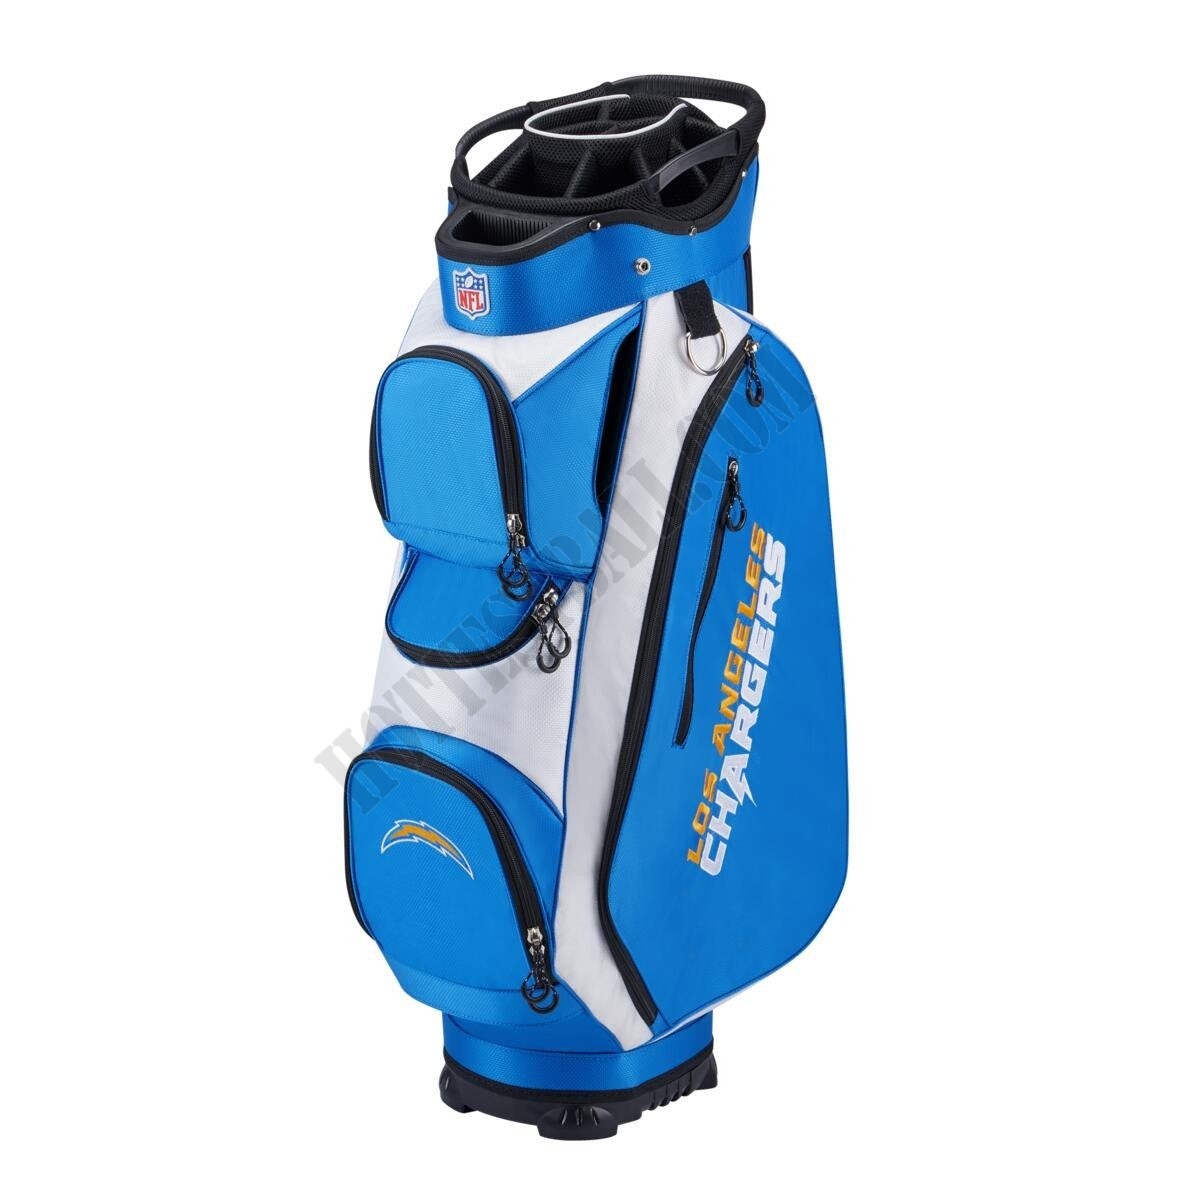 WIlson NFL Cart Golf Bag - Los Angeles Chargers - Wilson Discount Store - WIlson NFL Cart Golf Bag - Los Angeles Chargers - Wilson Discount Store